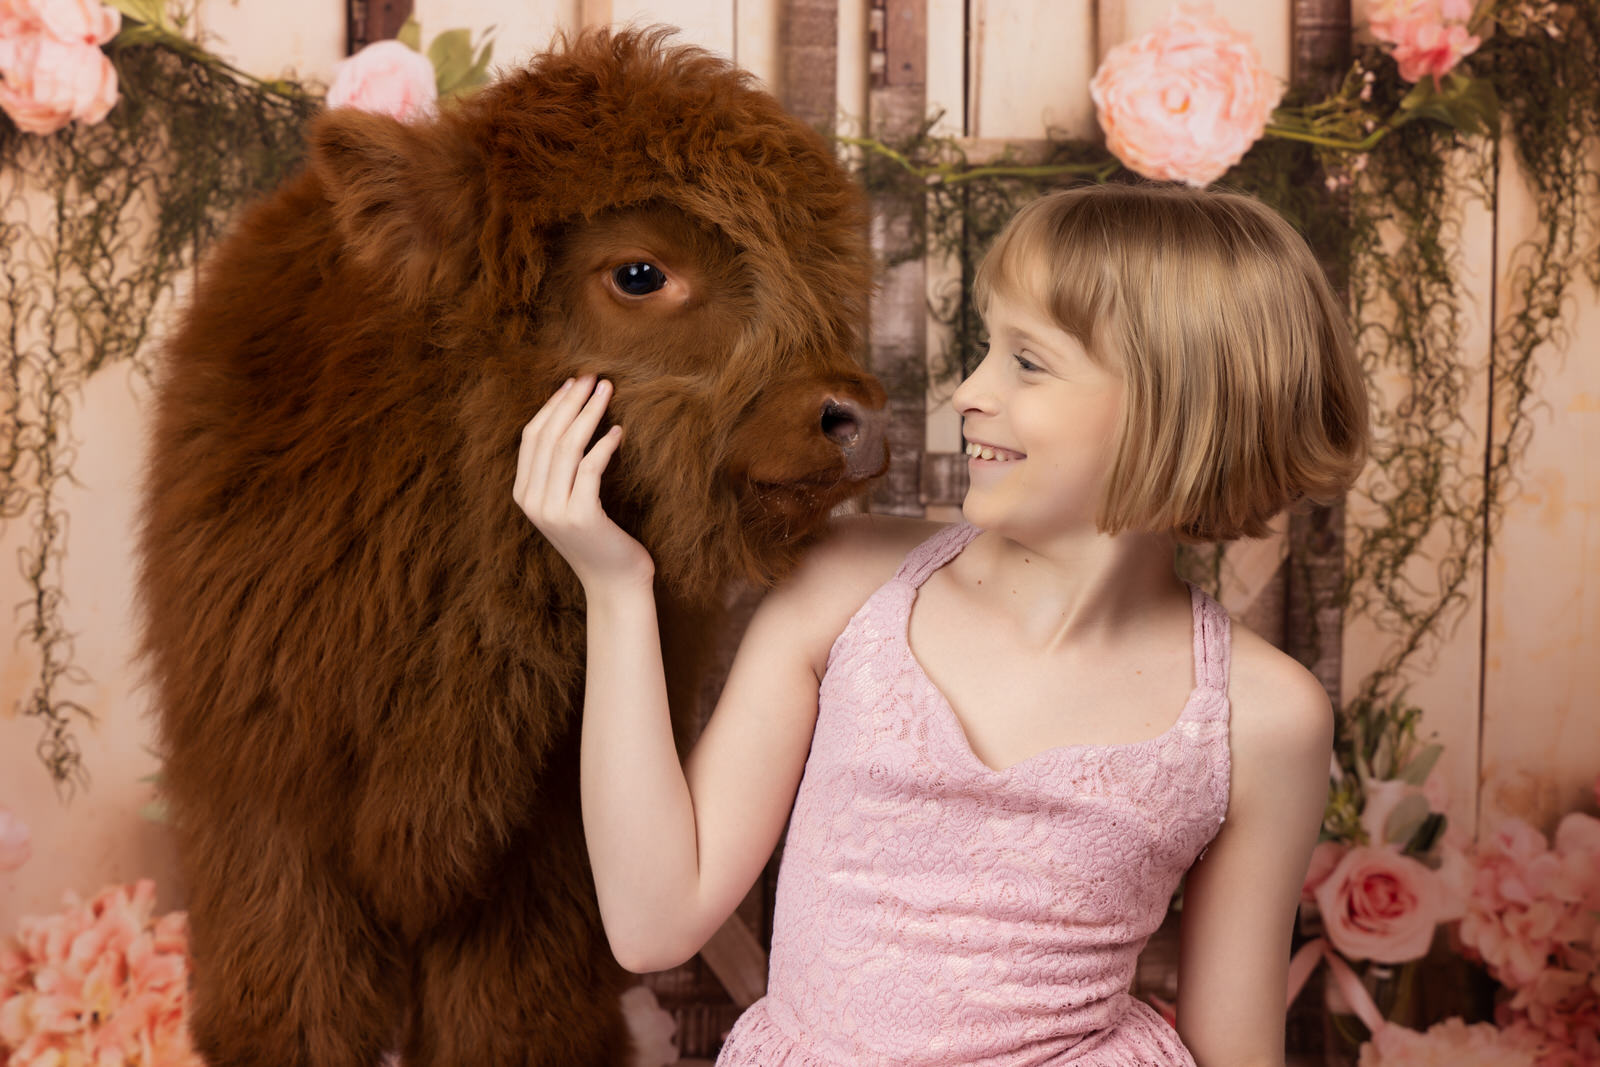 A young girl sits in a studio while scratching the face of a fuzzy brown cow